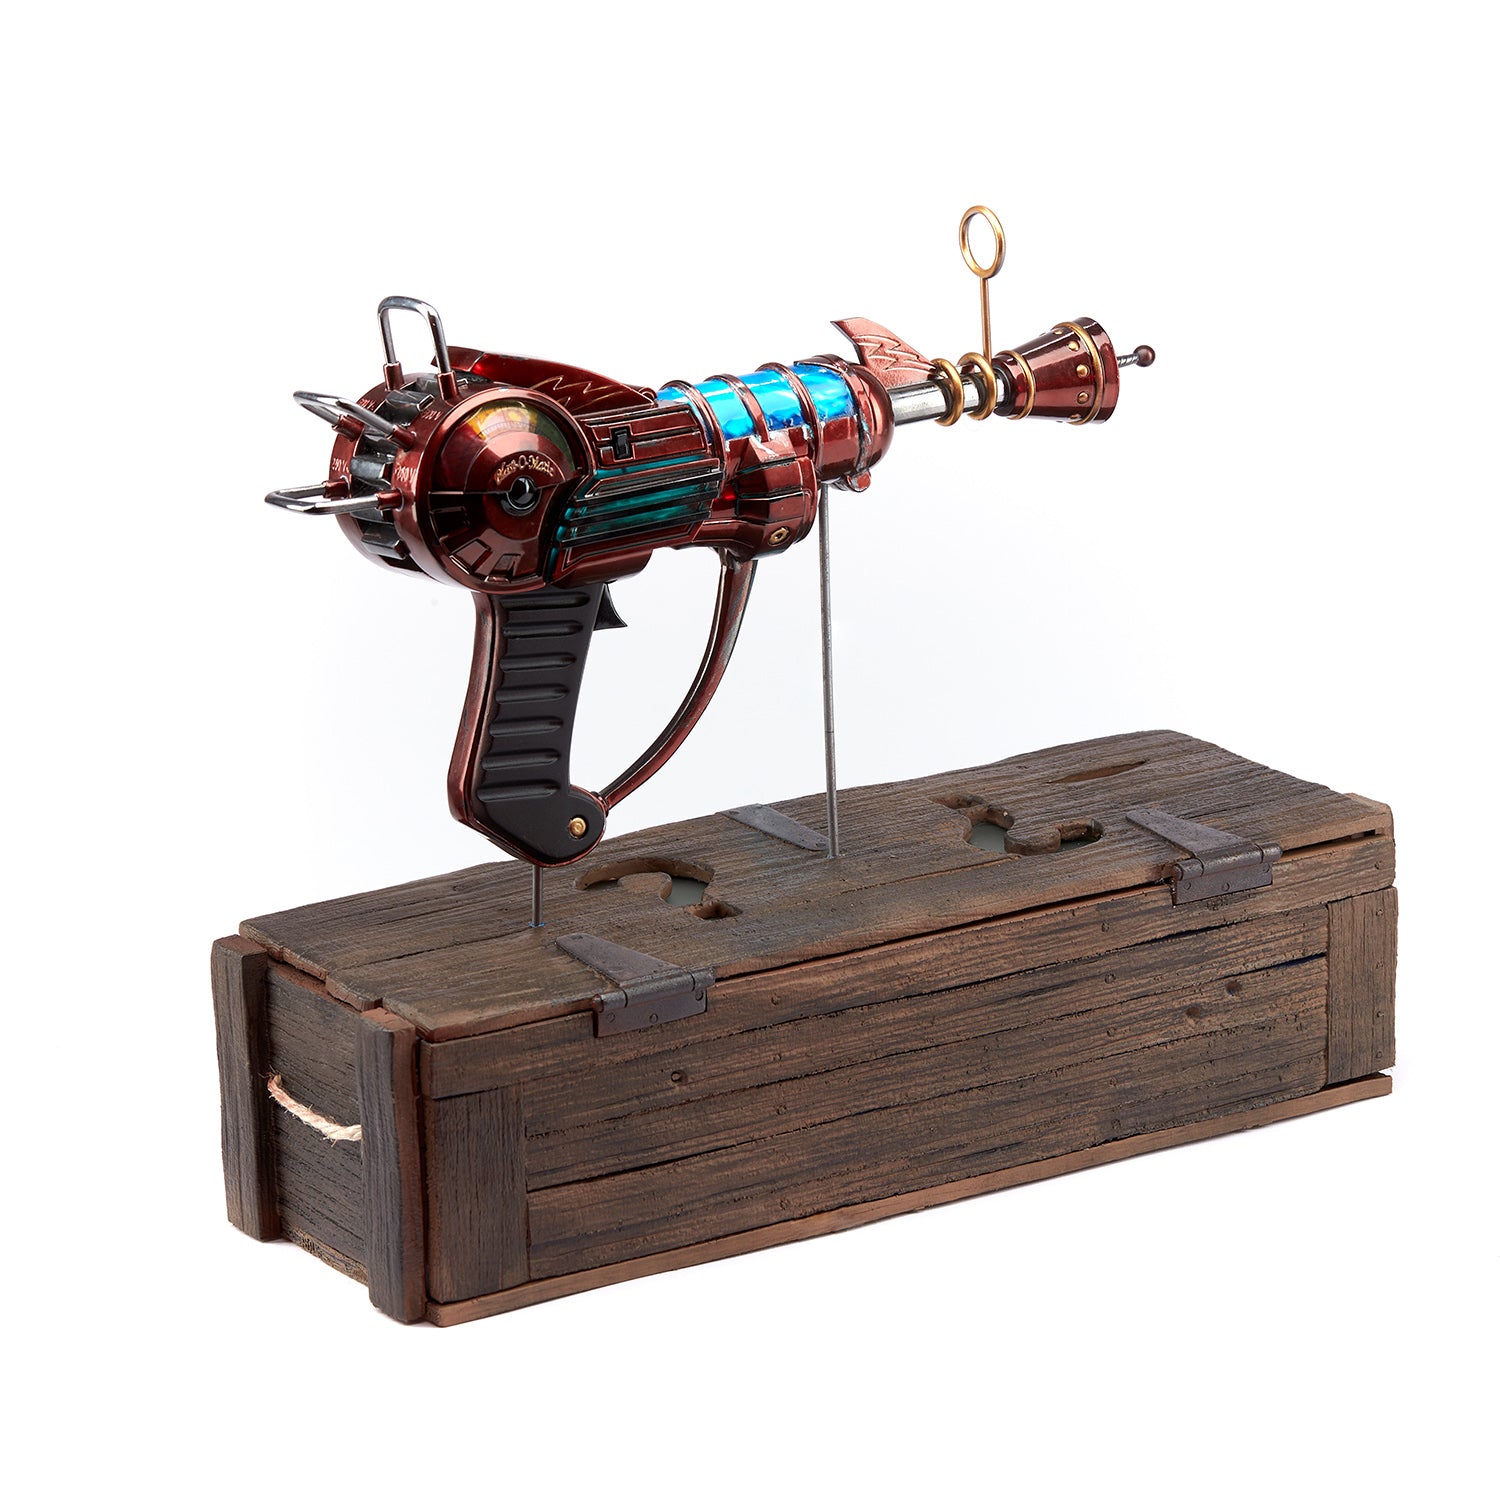 Call of Duty Ray Gun Statue - Back Right Side View